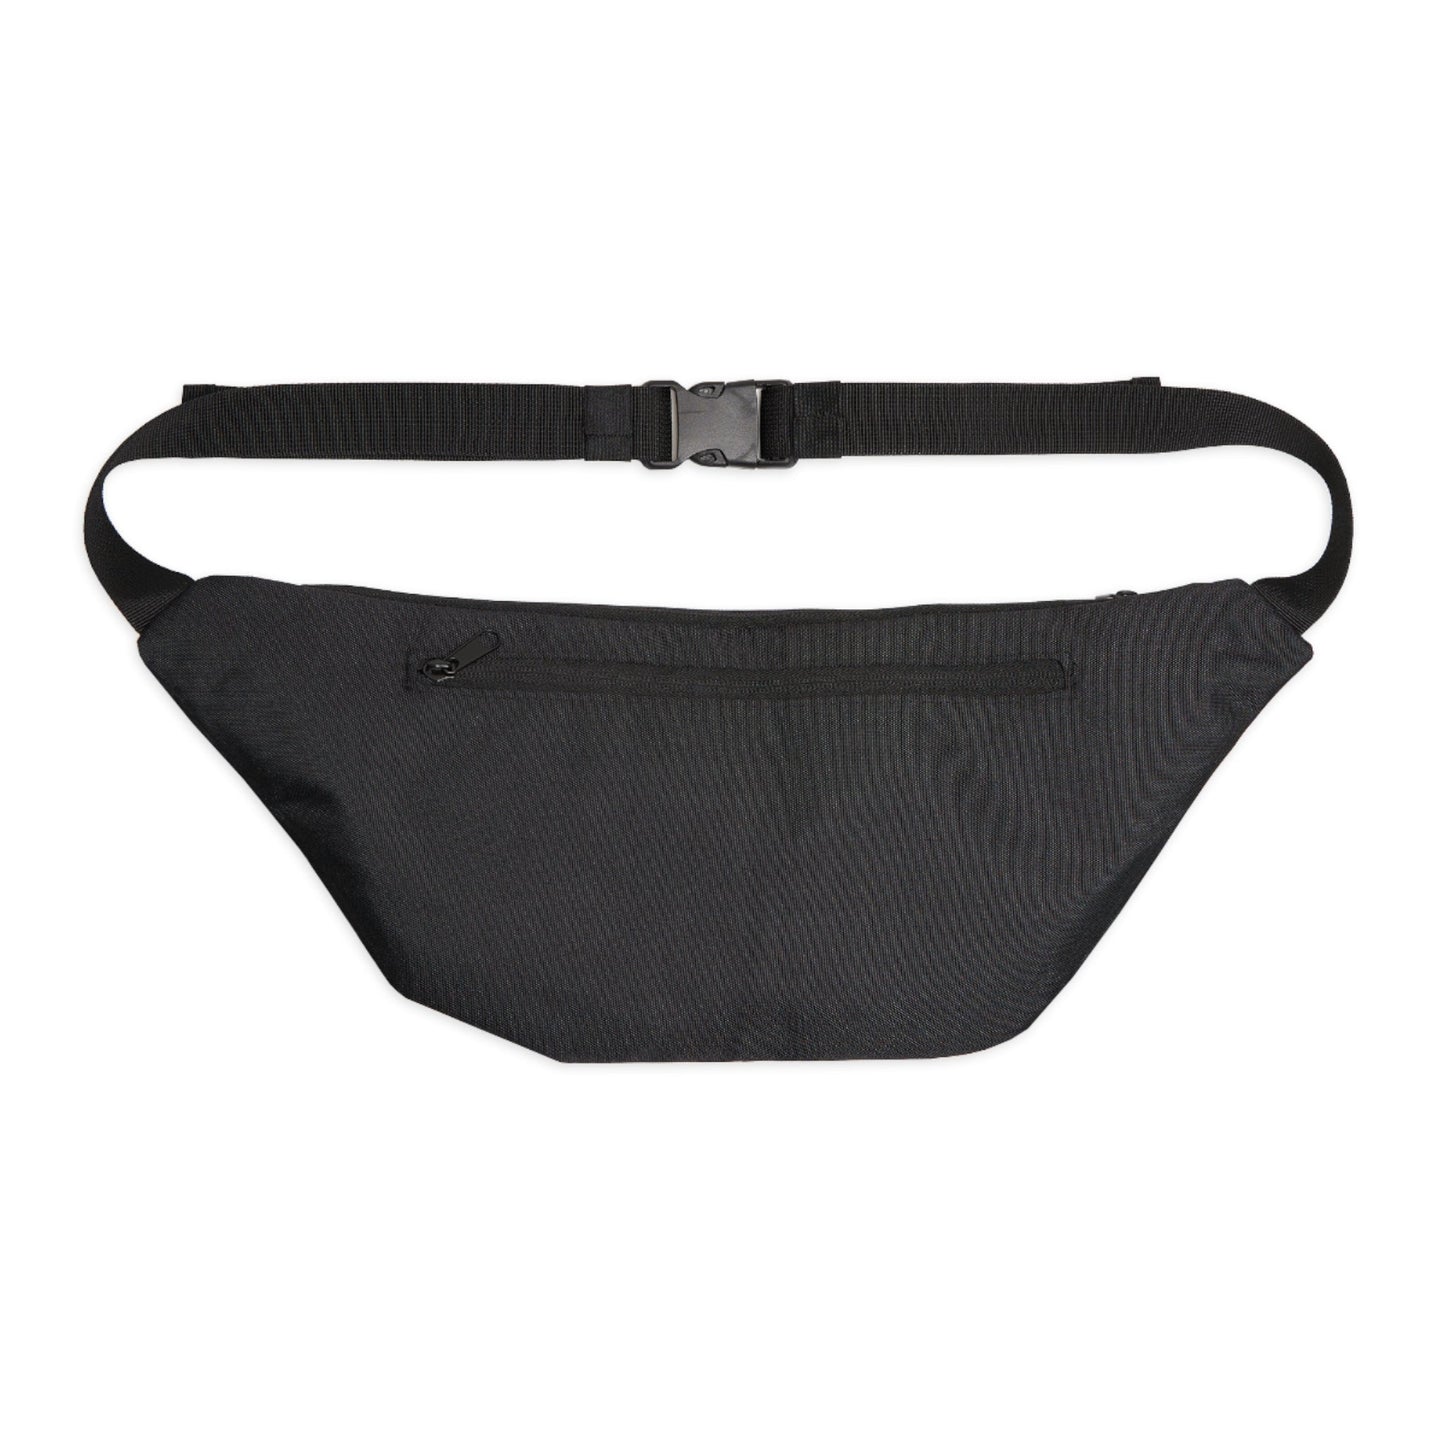 HORACE : Large Fanny Pack - Shaggy Chic